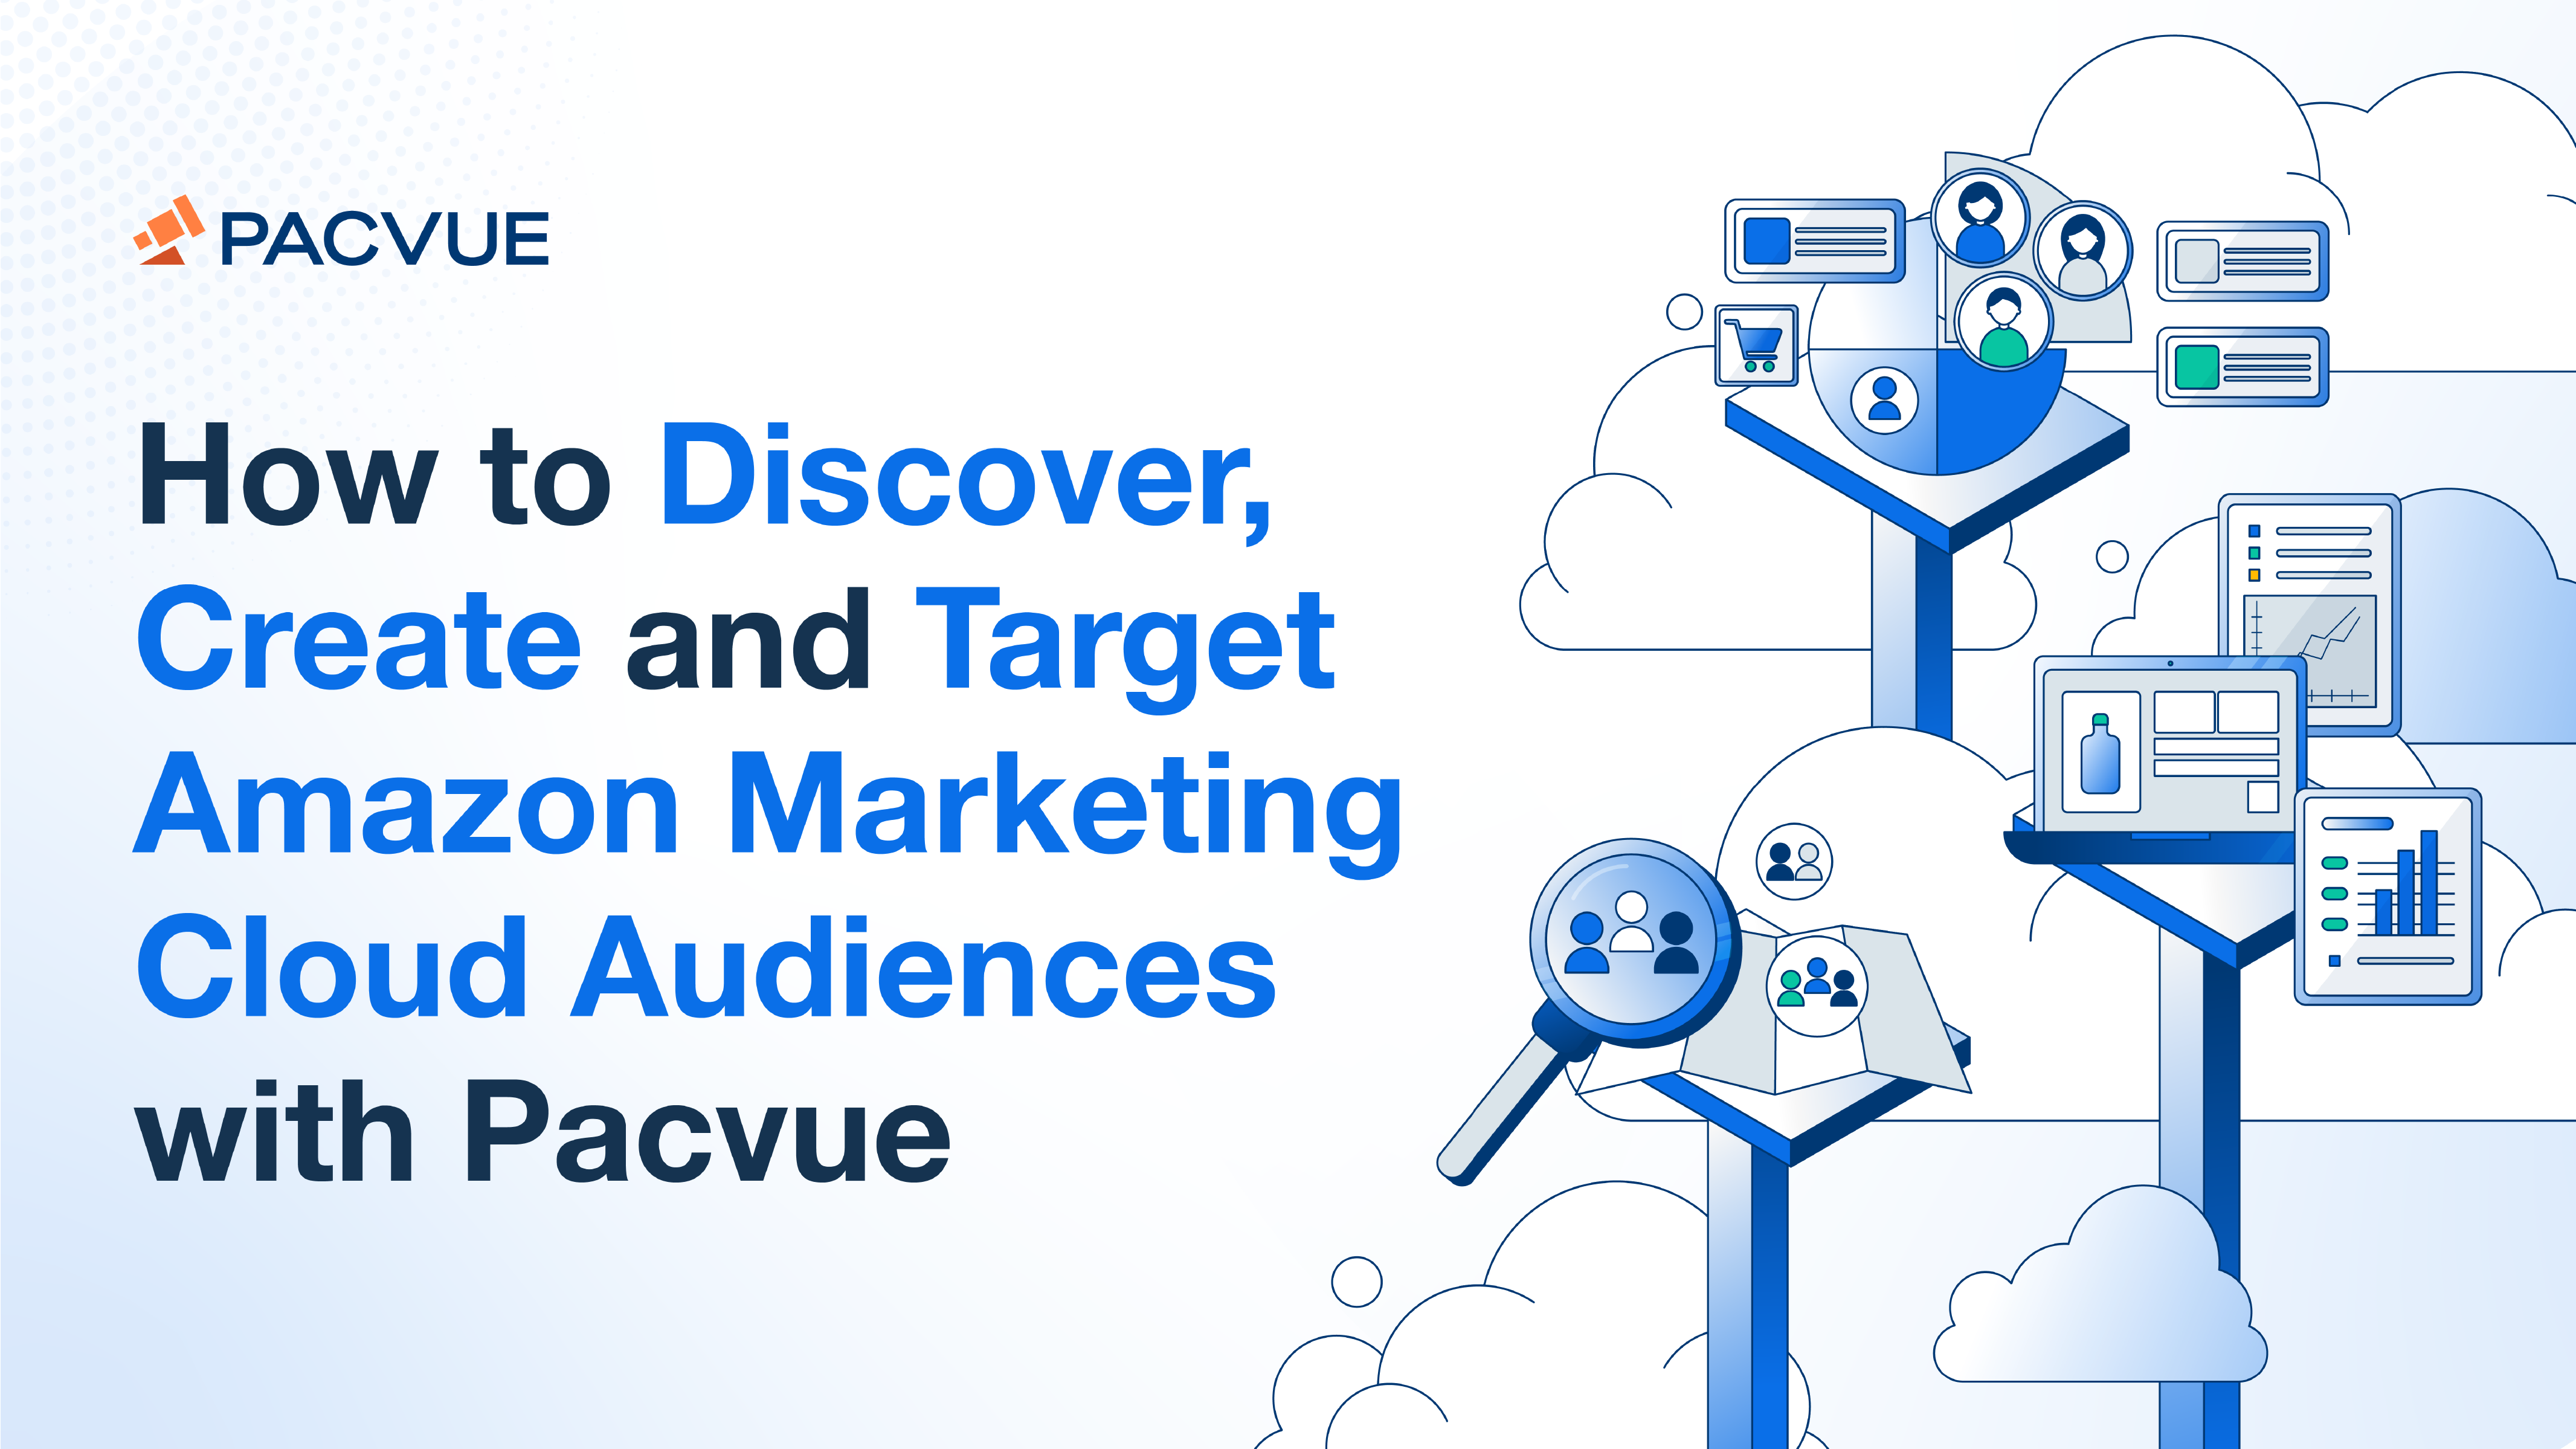 How to Discover, Create and Target AMC audience with Pacvue